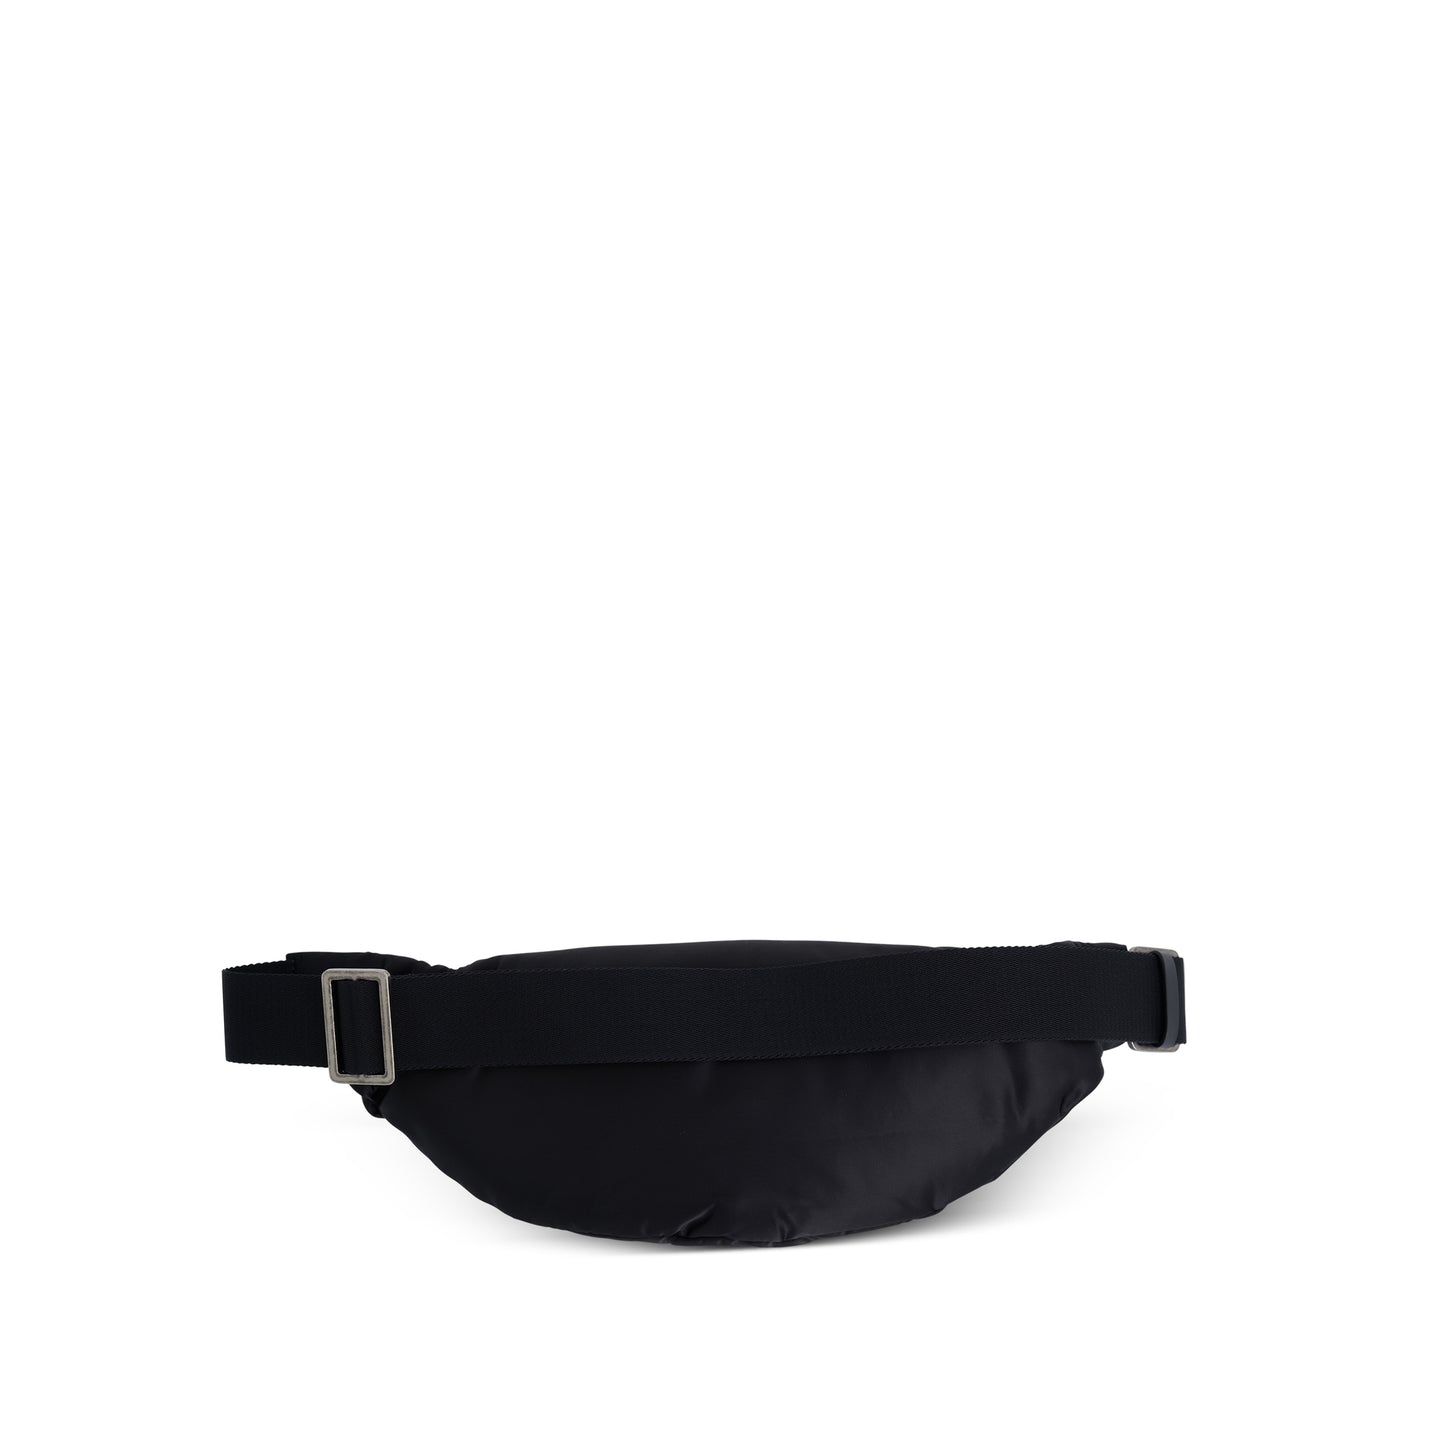 Curved Logo Fannypack in Black/Silver